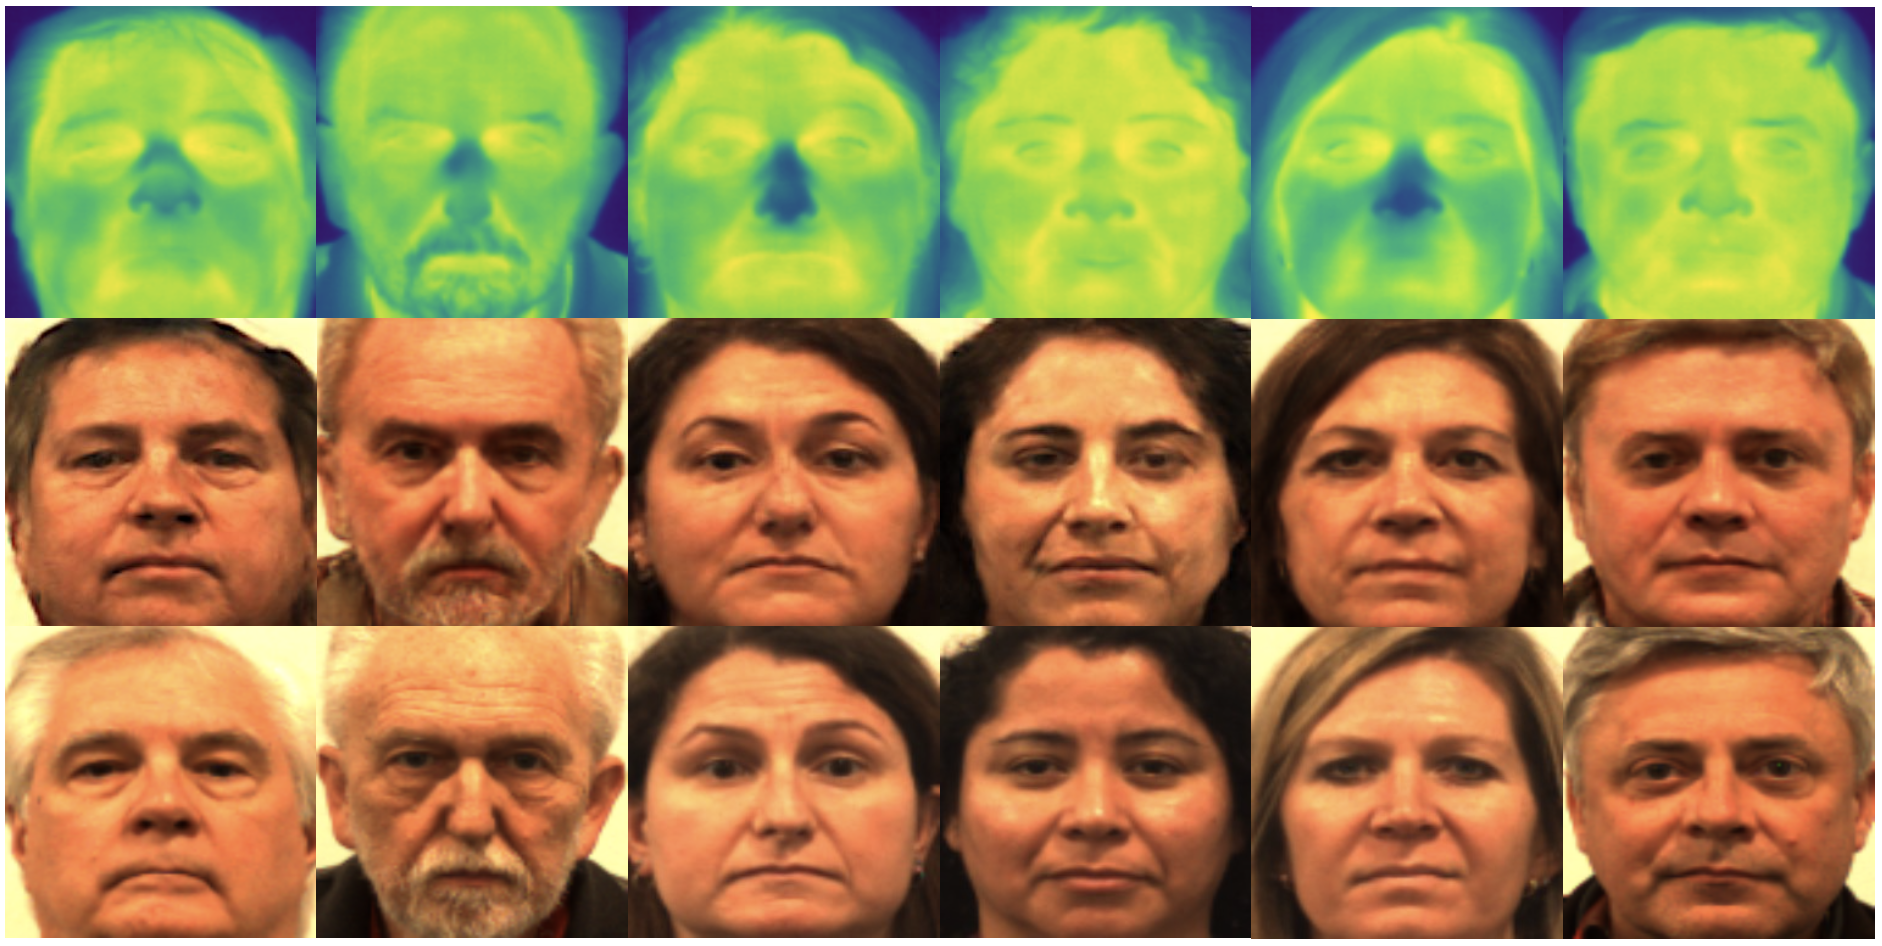 LG-GAN.  Synthesis of visible face images (middle row) from thermal input images (top row) and comparison with the ground truth images (bottom row).